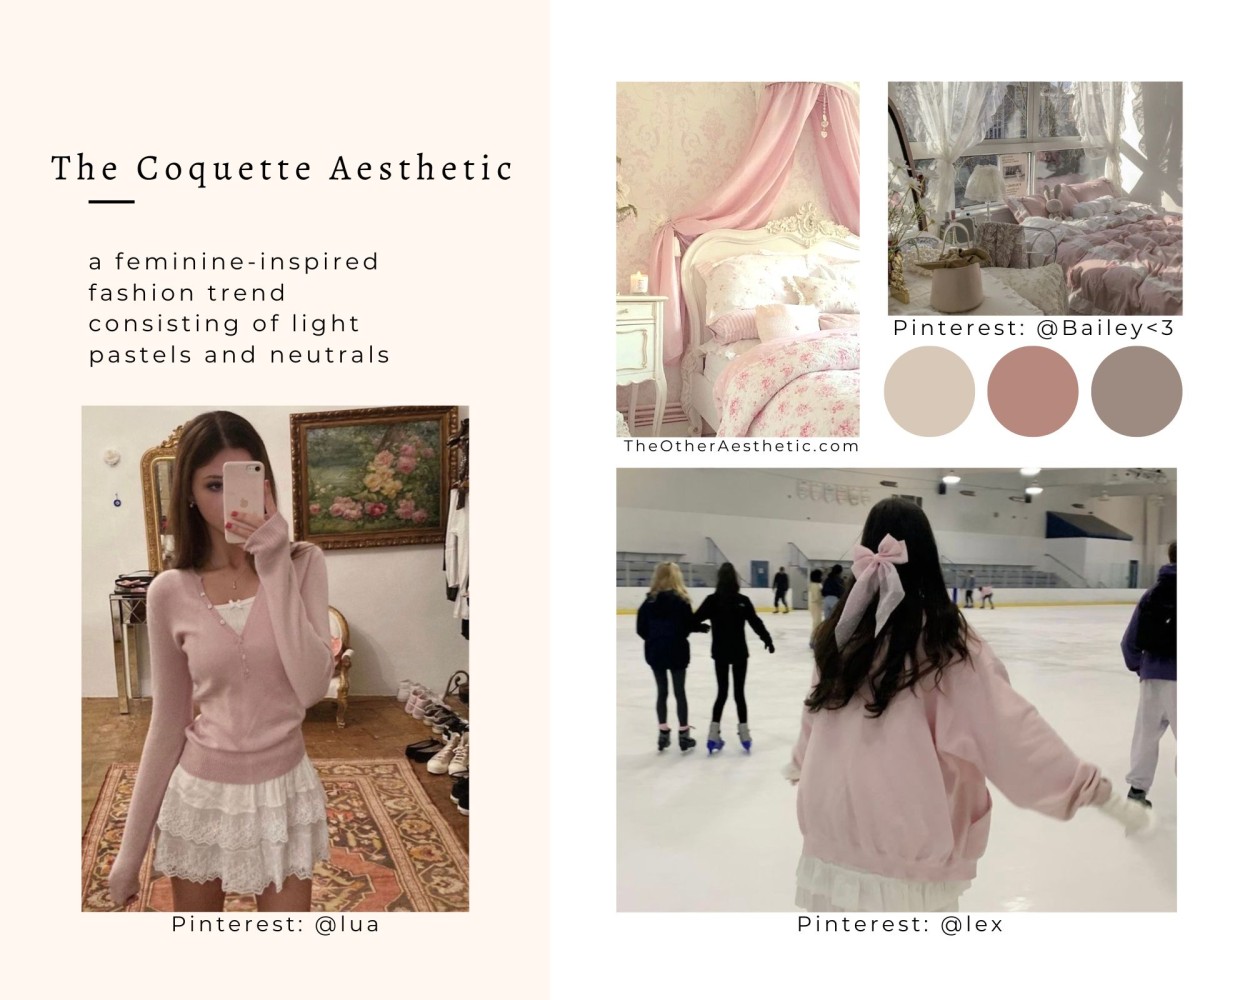 Gen-Z Mirrors Style in Home Fashion: coquette and its modern take